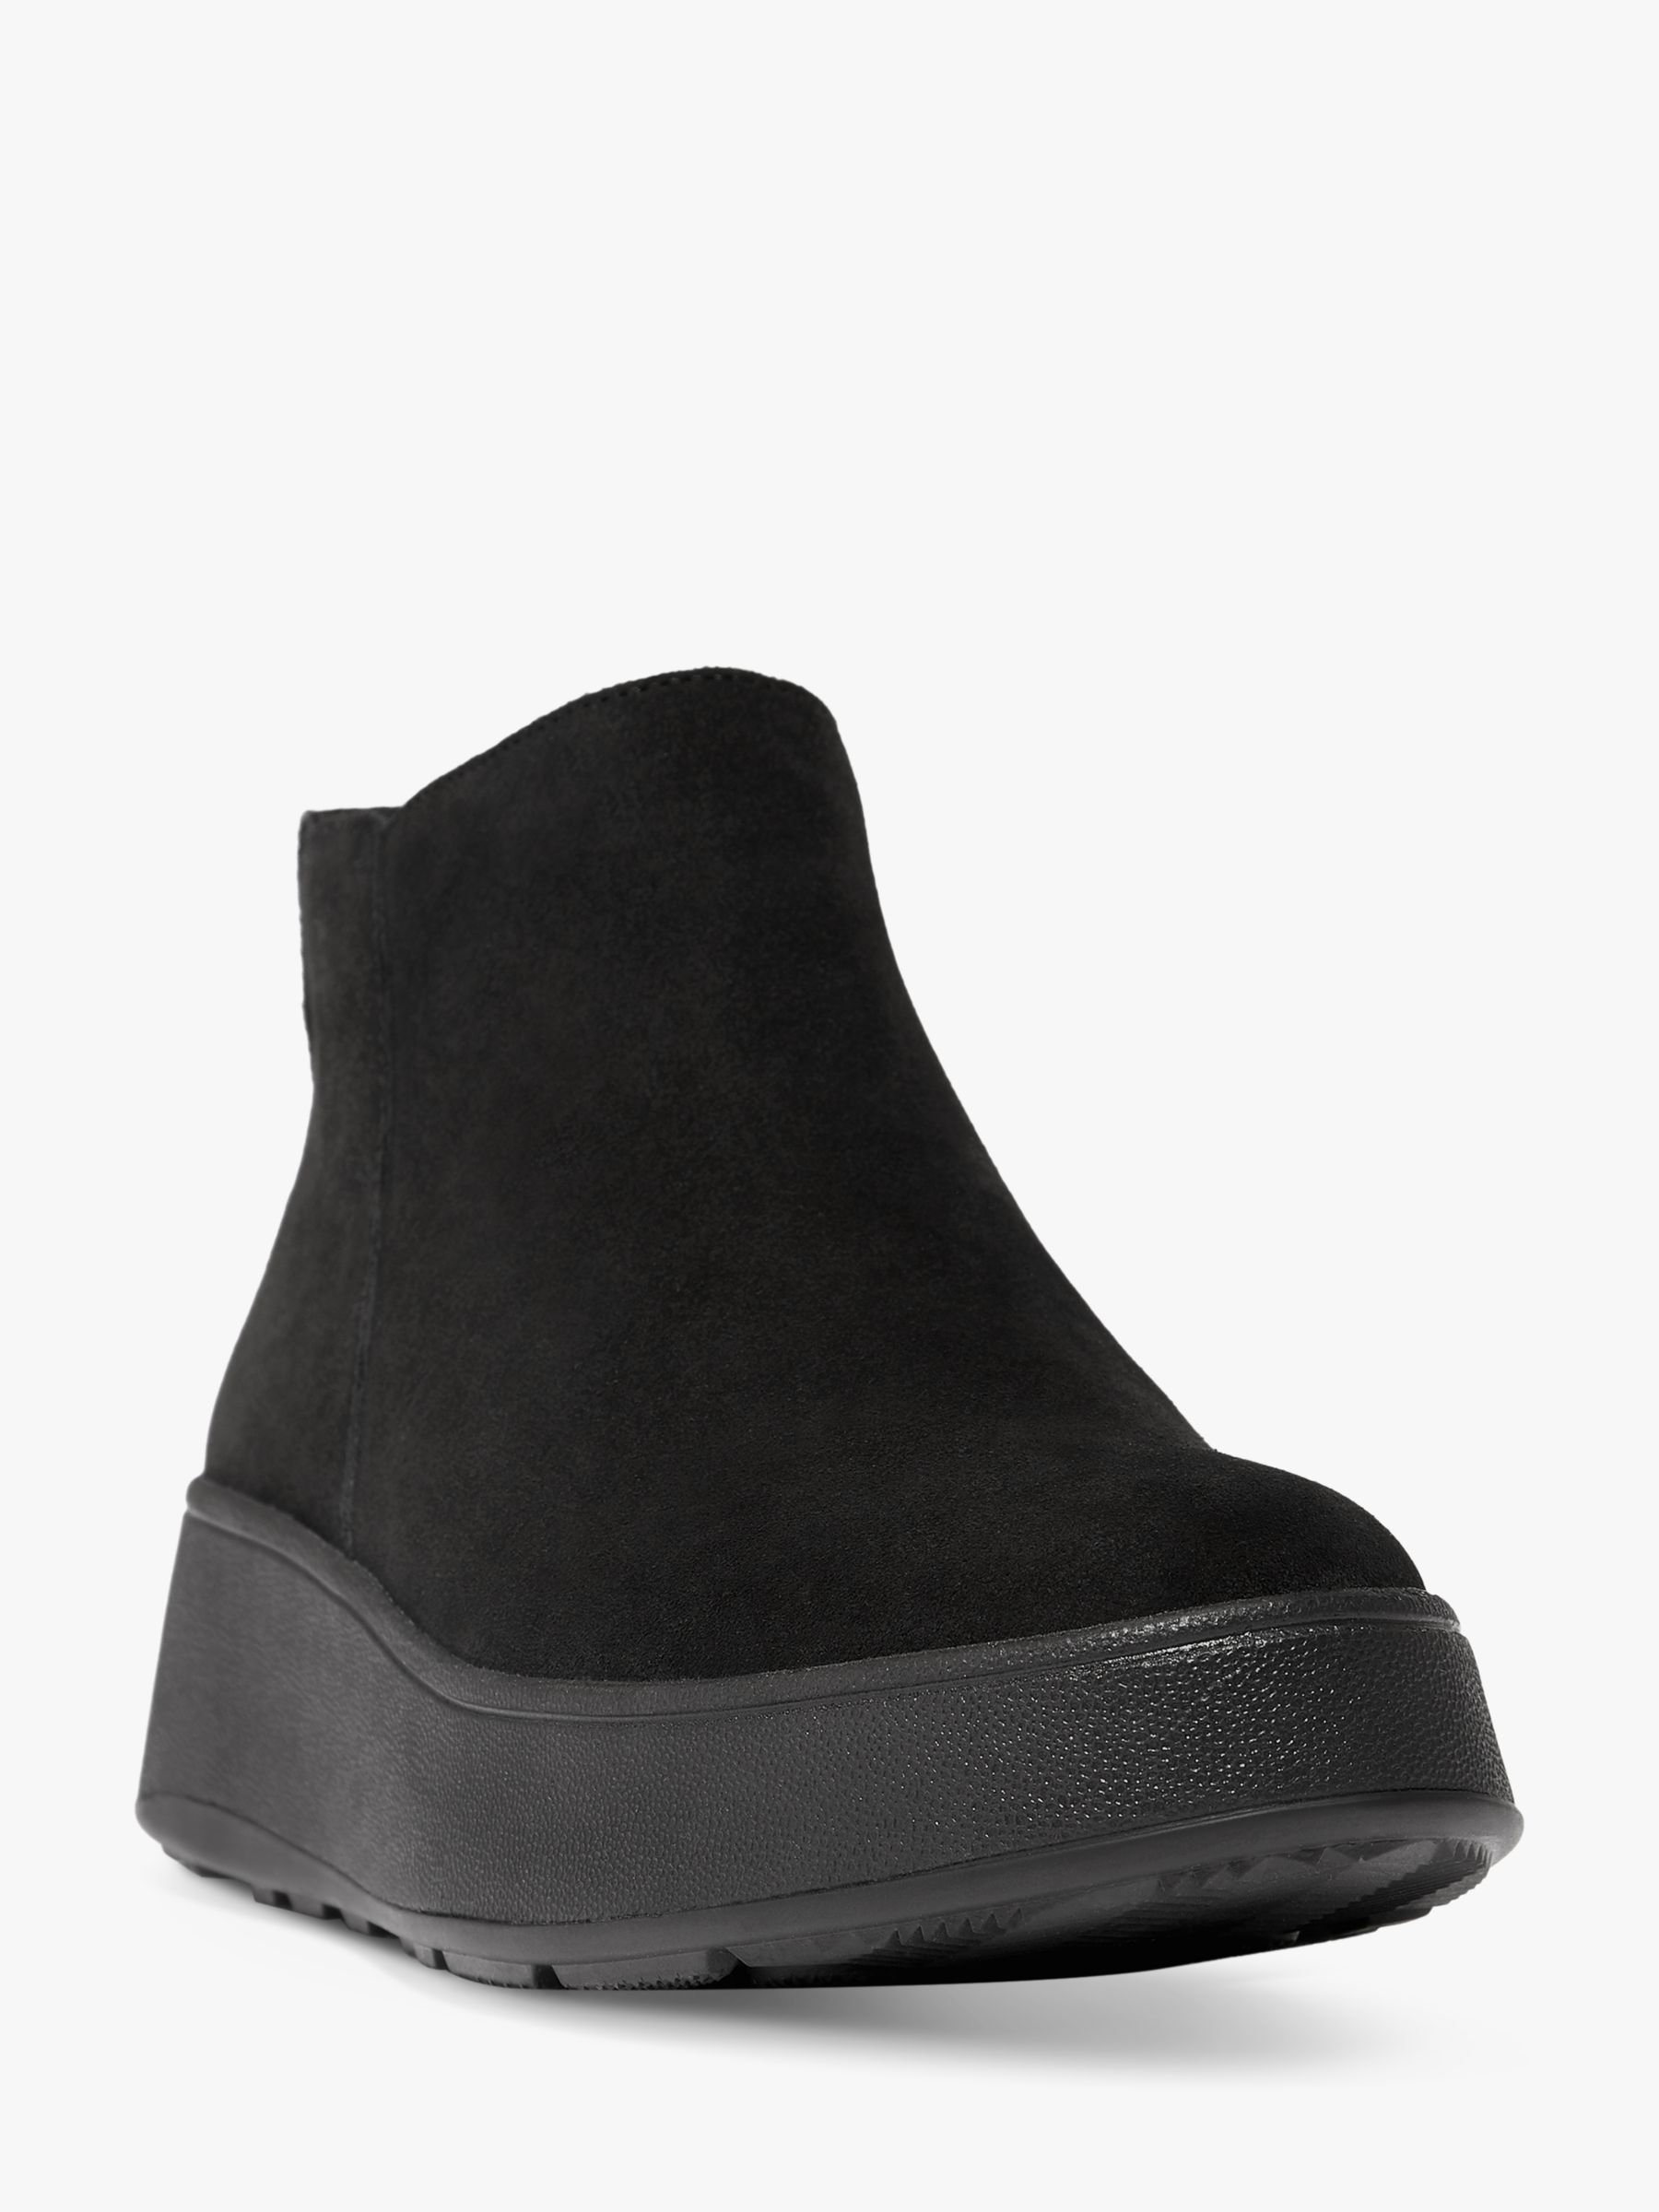 FitFlop Suede Flatform Ankle Boots, All Black at John Lewis & Partners